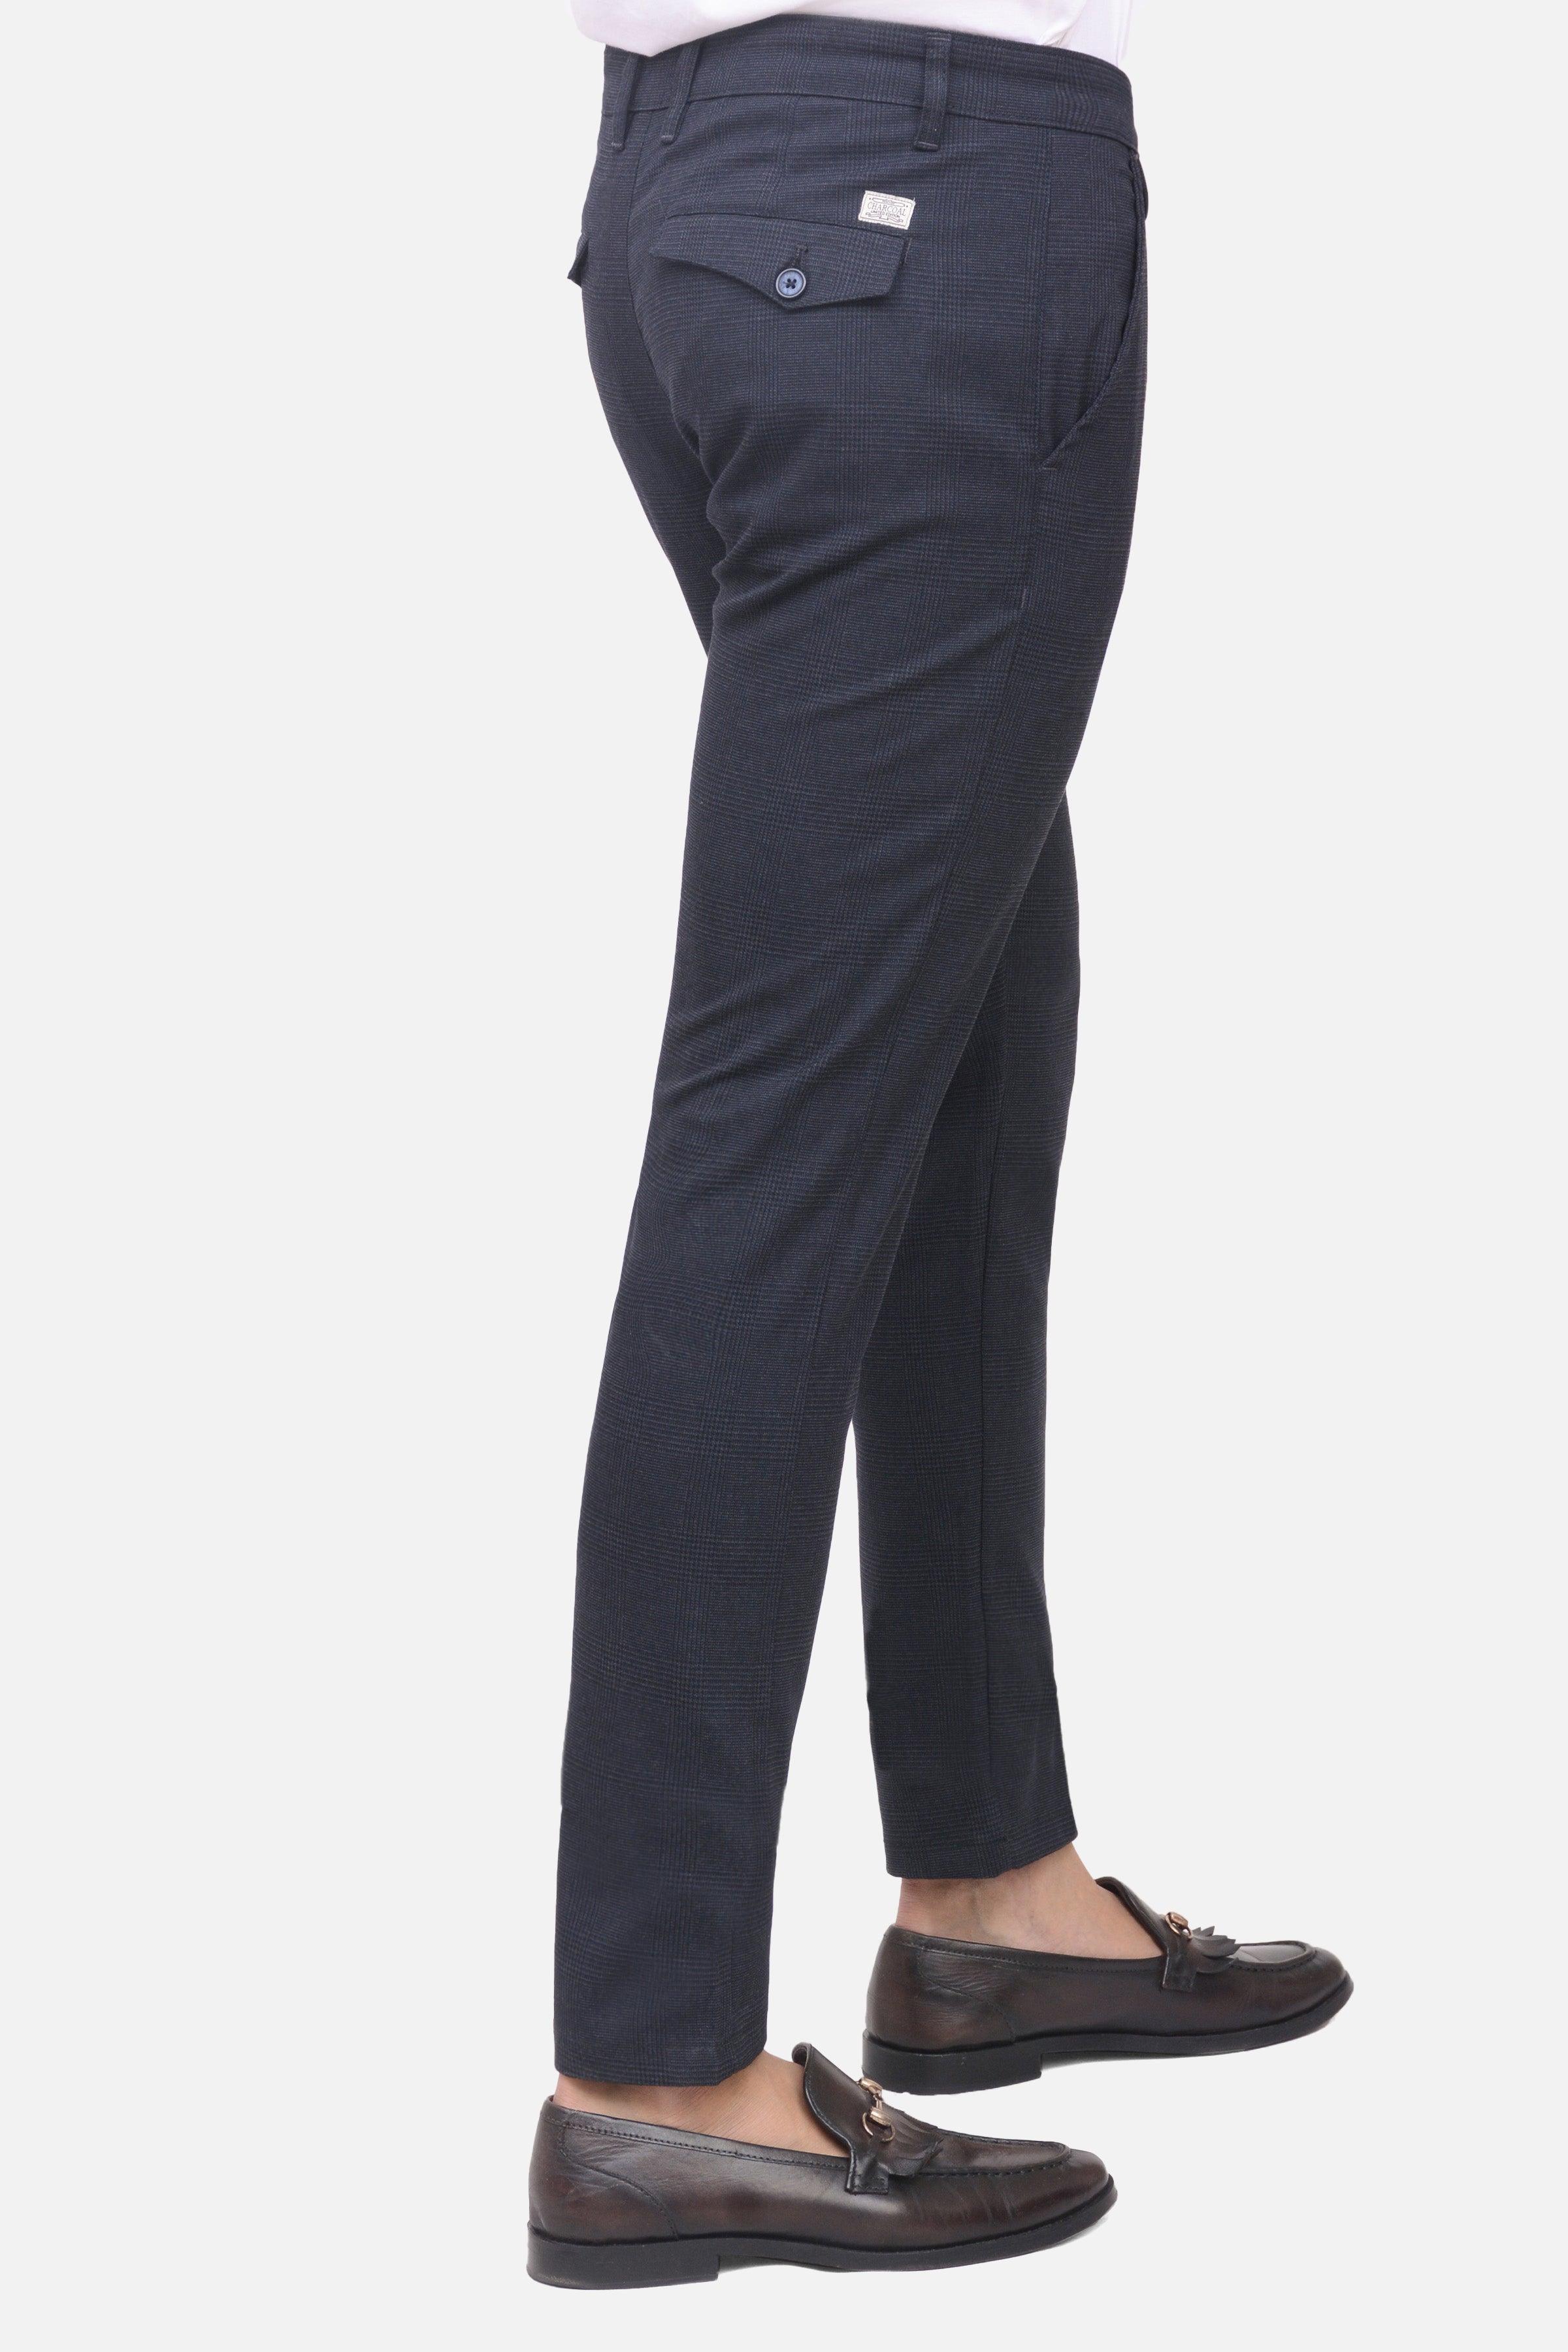 Natural Stretch Twill Suit Trousers  Charcoal  Charles Tyrwhitt